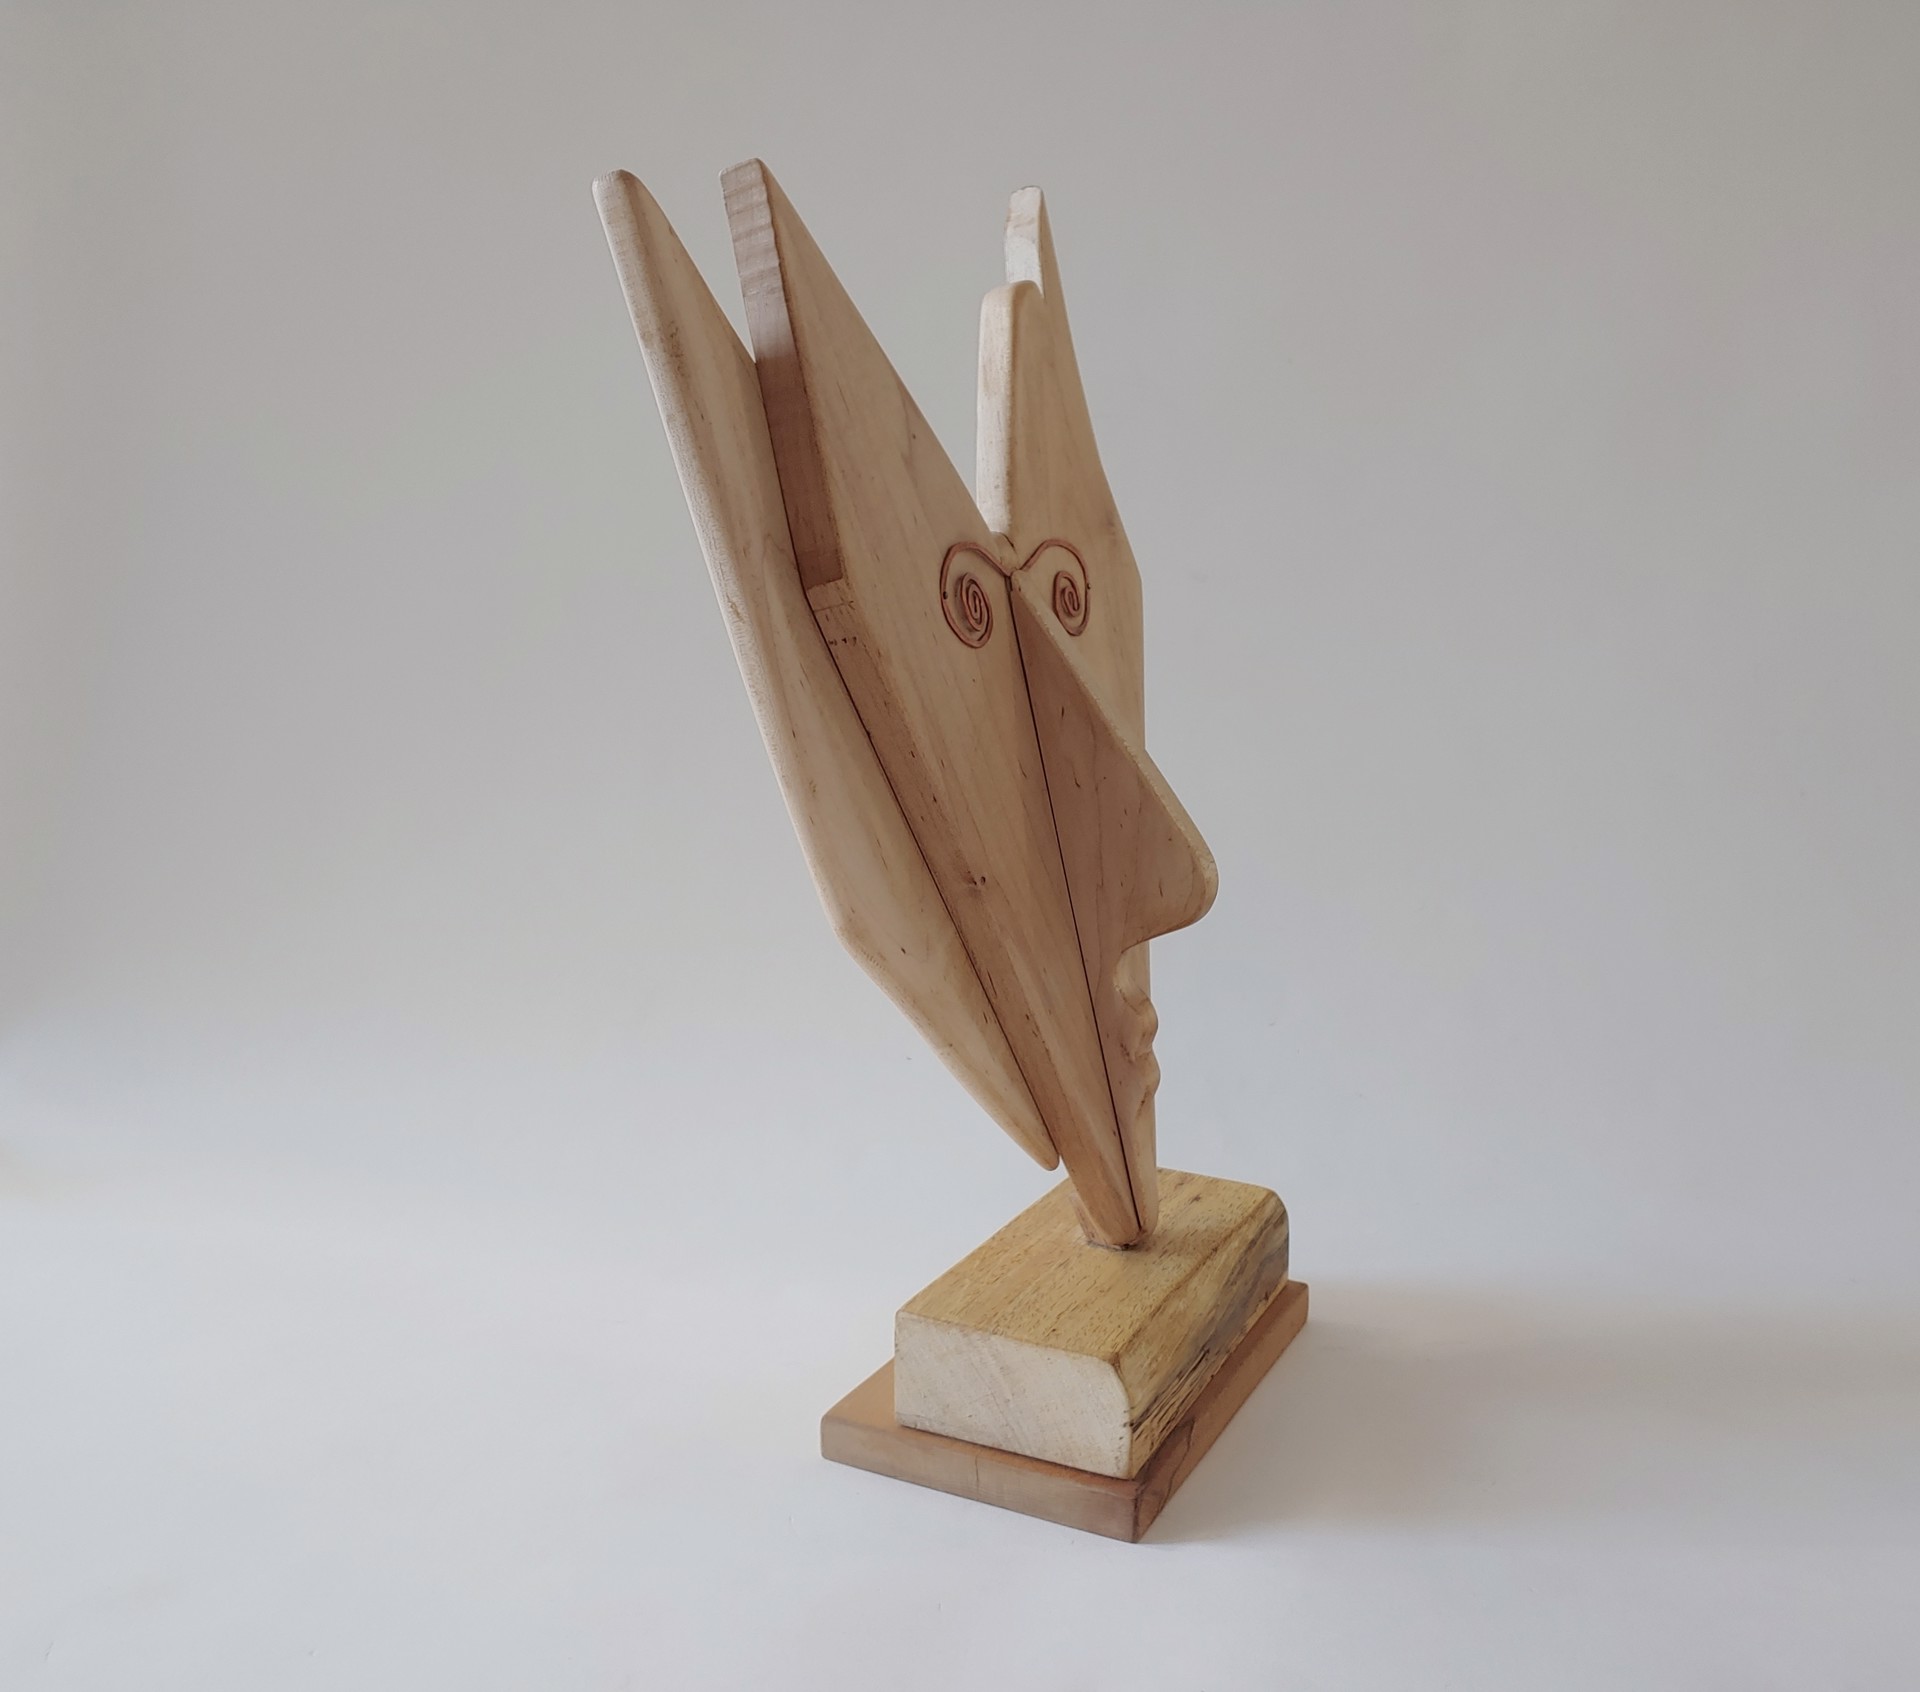 Abstract Bust - Wood Sculpture by David Amdur